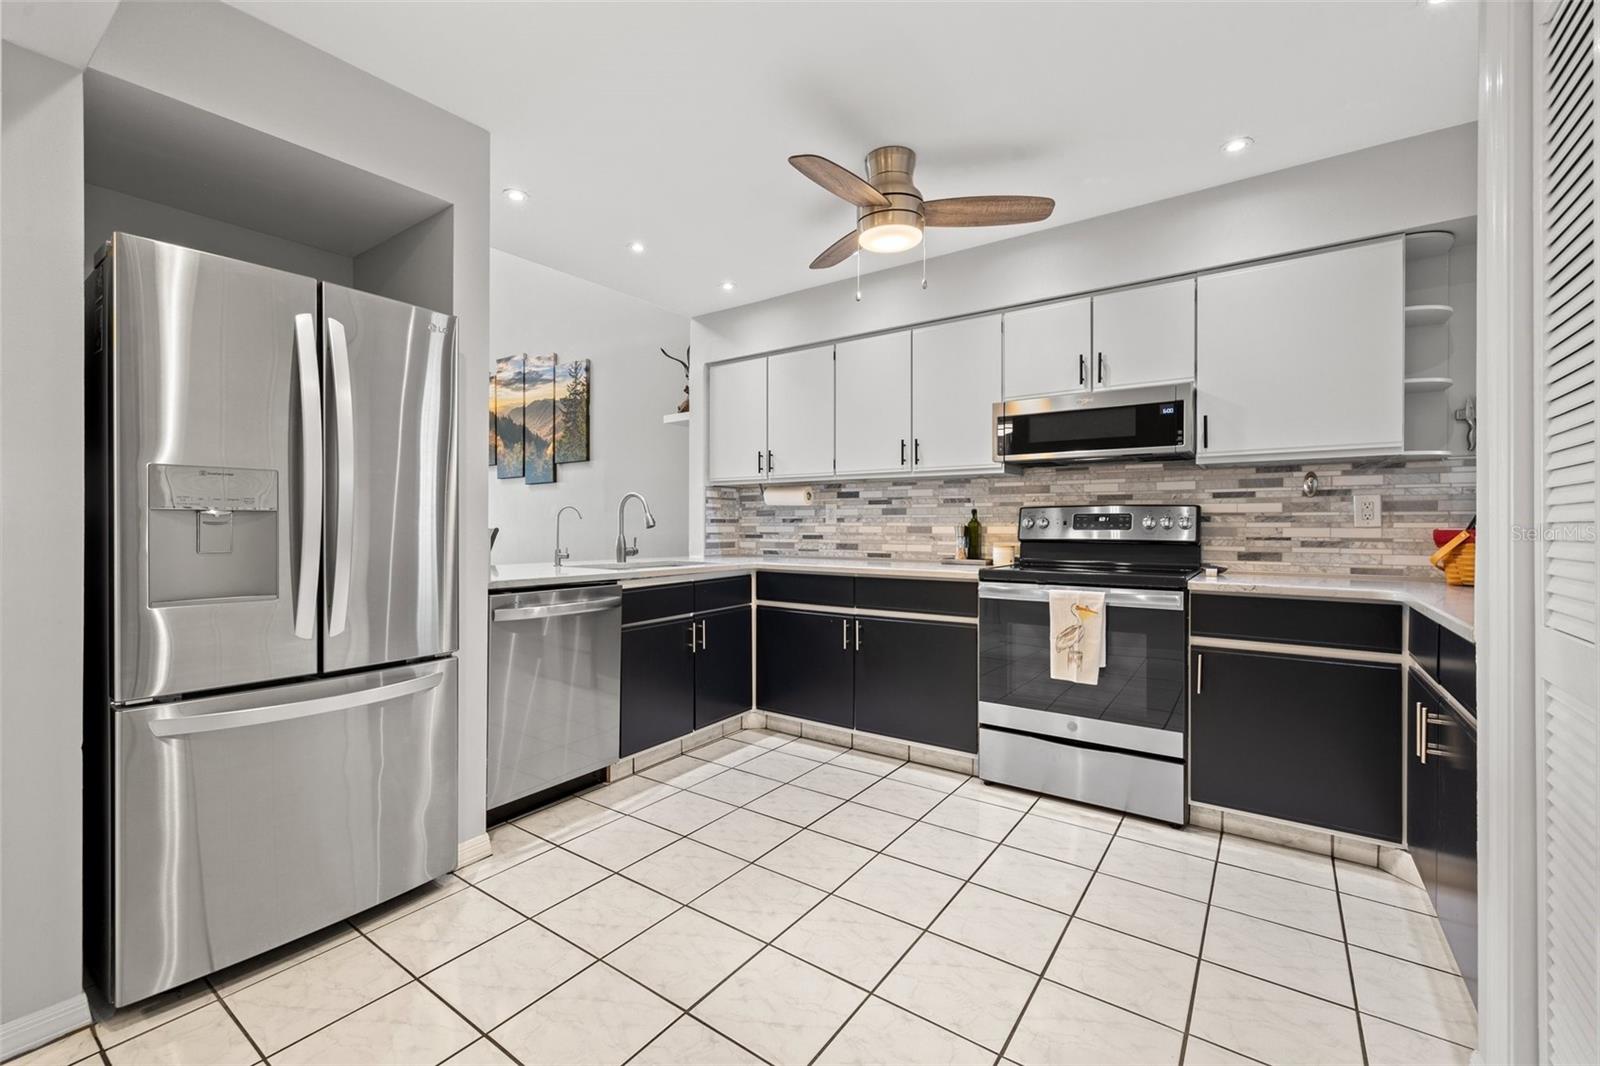 Beautifully updated kitchen with quartz countertops and stainless steel appliances.